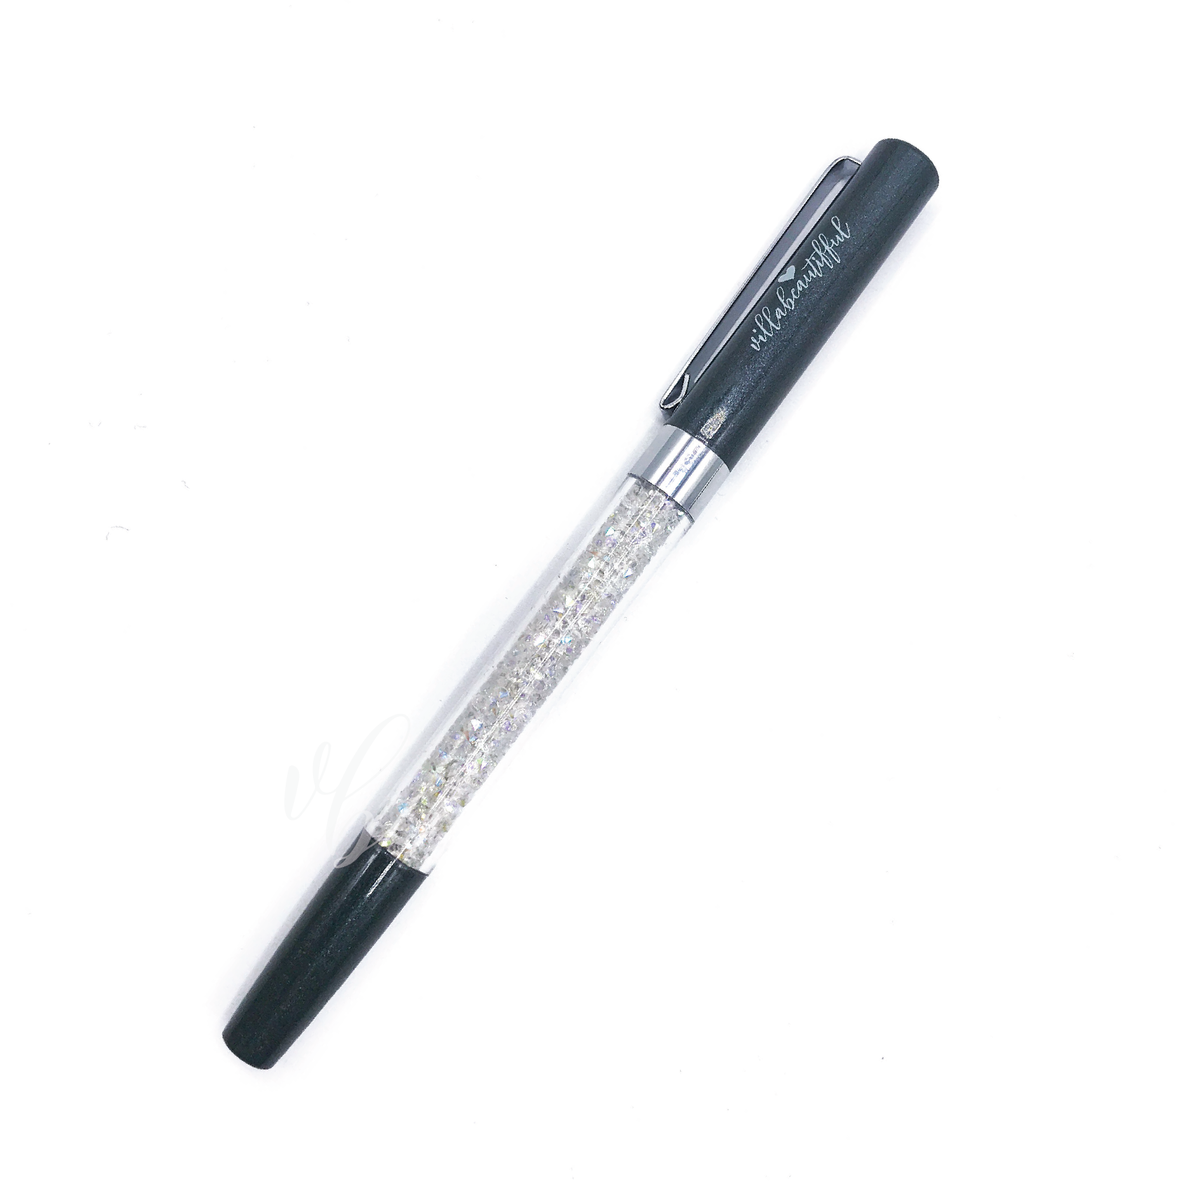 Mossy Rock Imperfect Crystal VBPen | limited pen